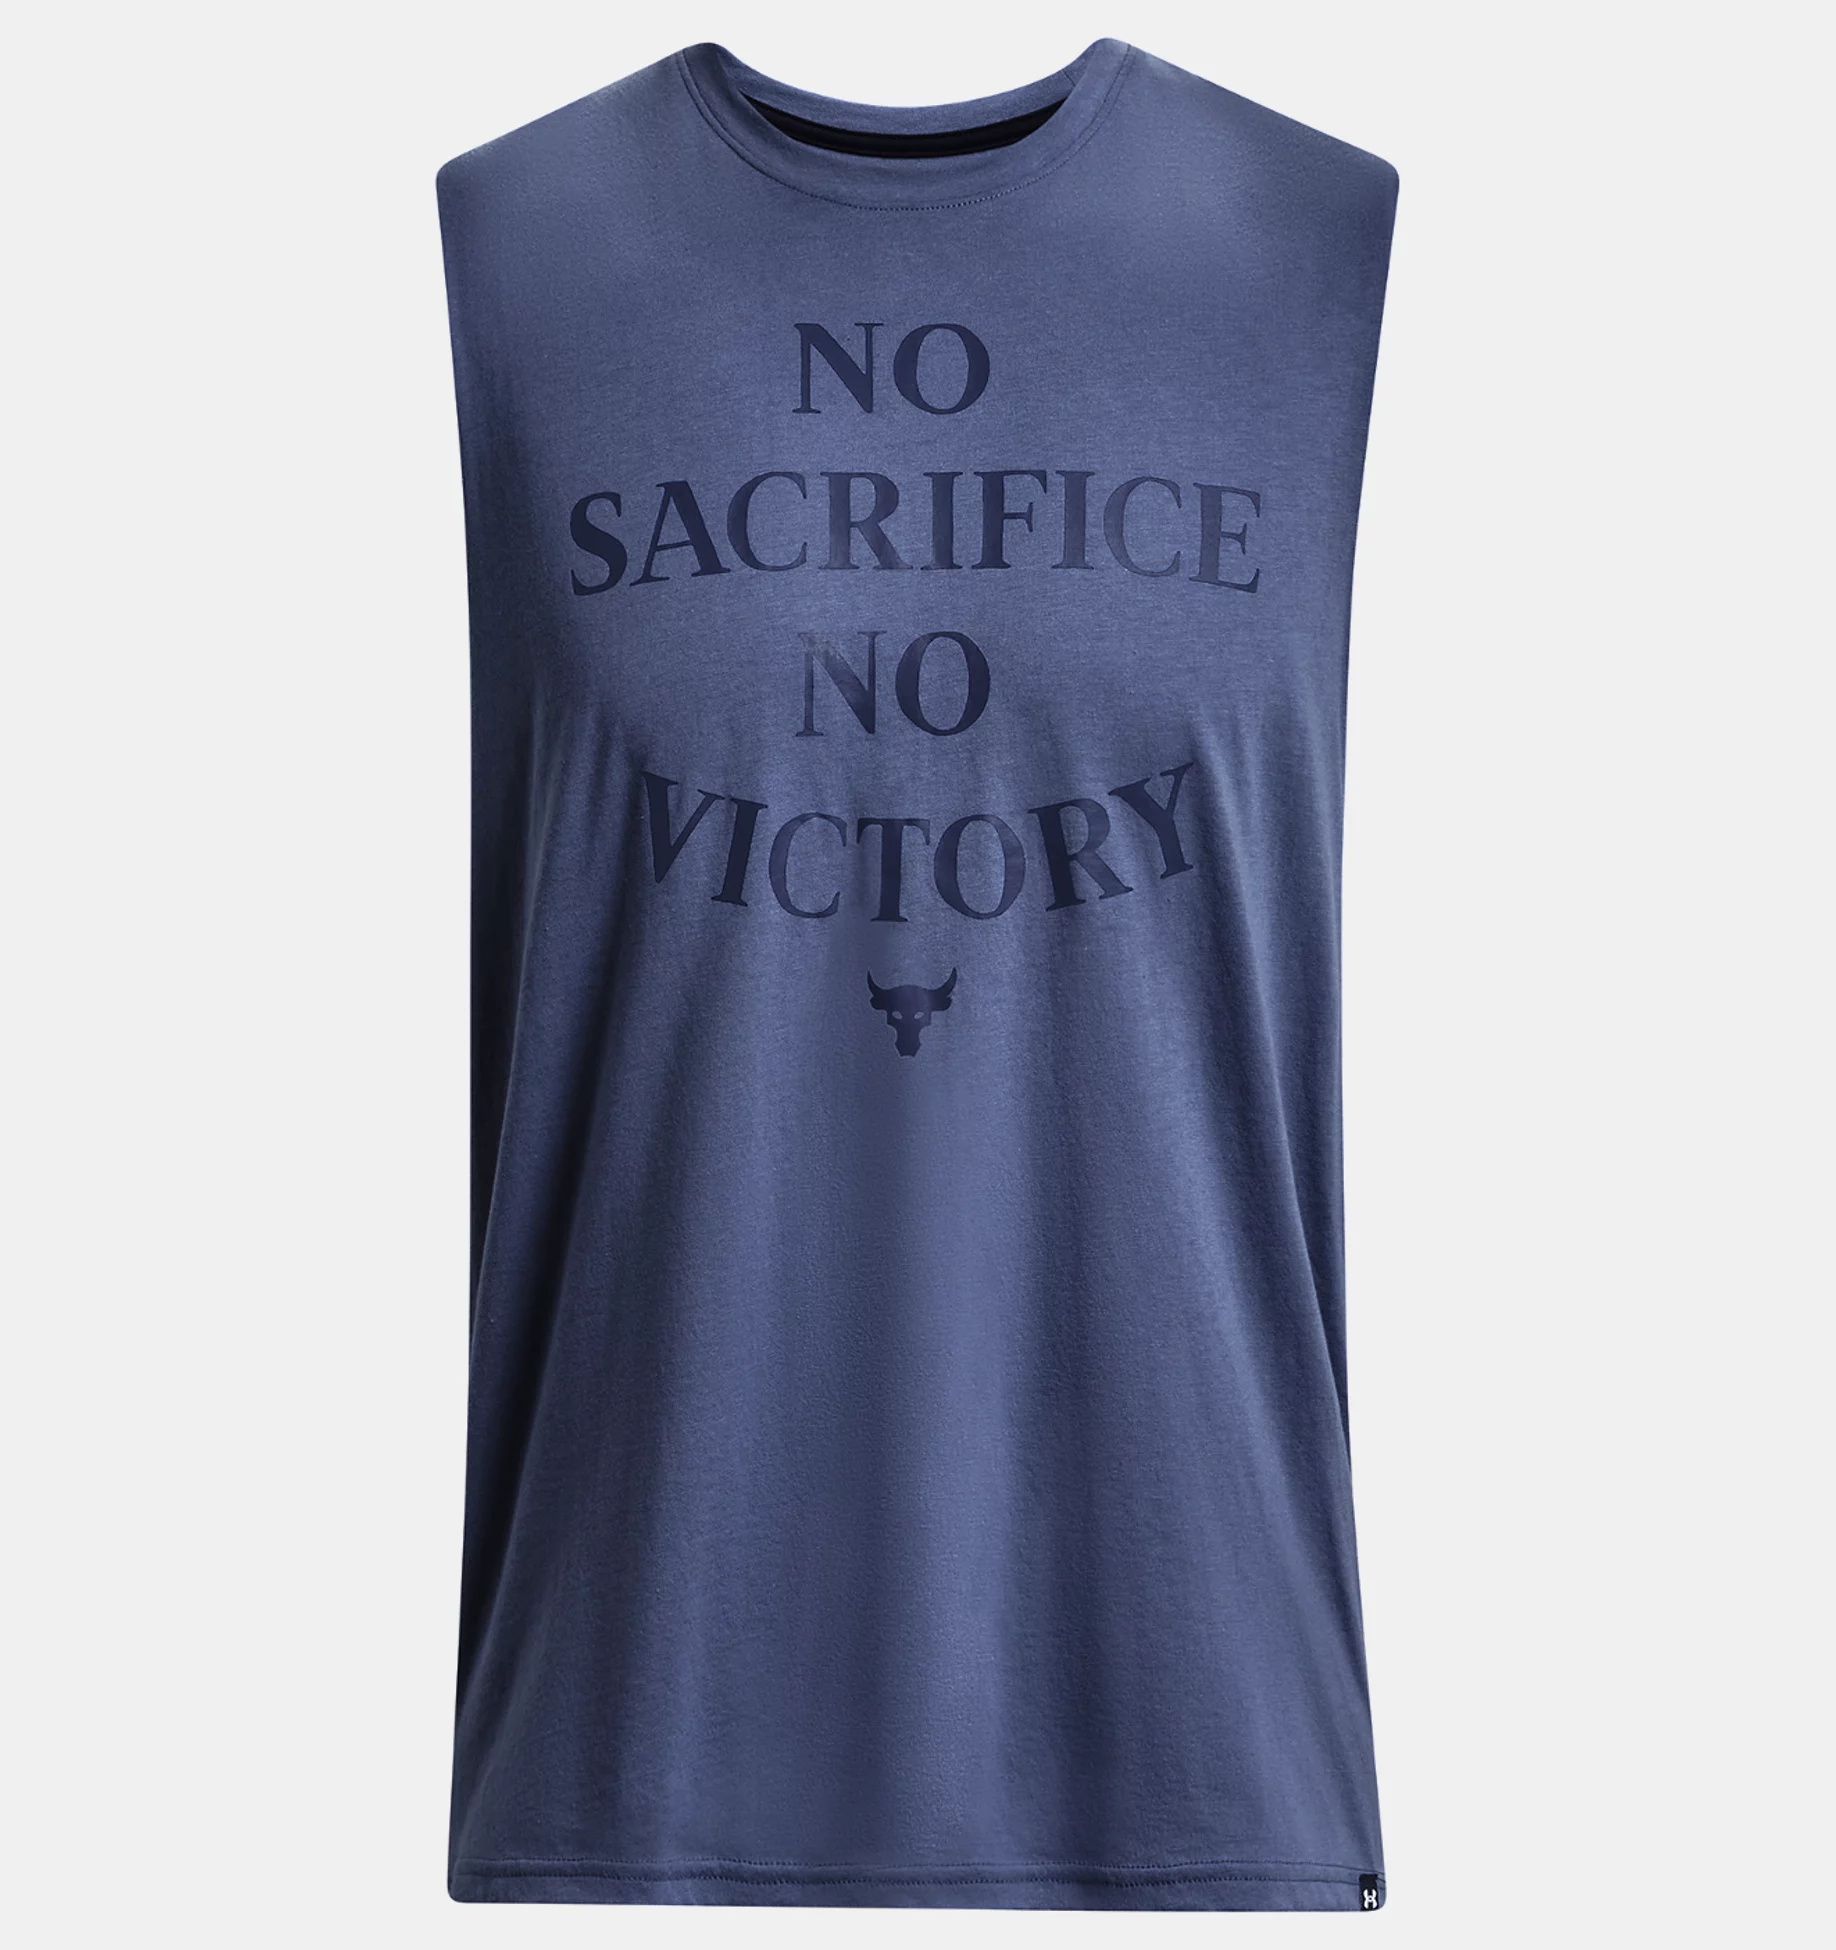 Under Armour Project Rock Show Me Sweat Tank 1380180-480